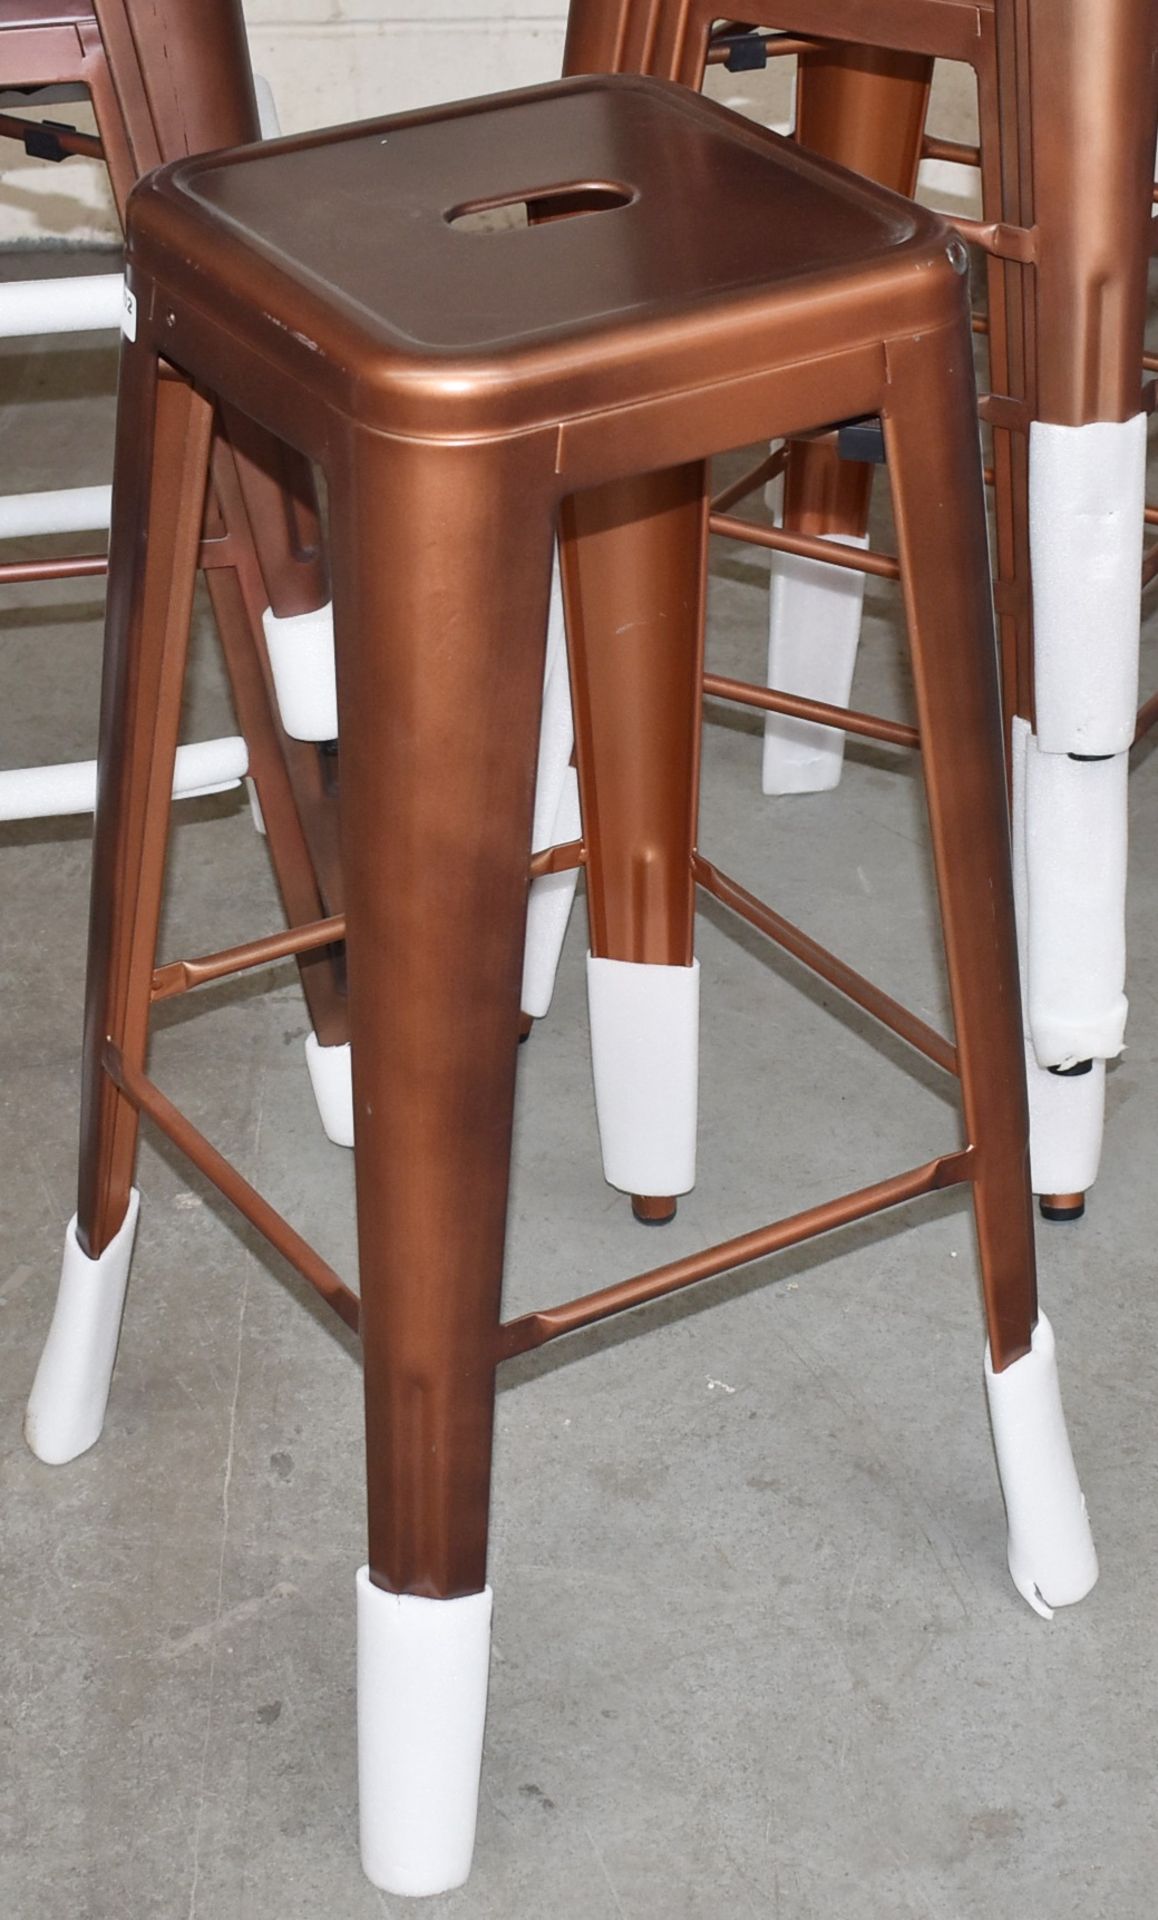 1 x Tolix Industrial Style Outdoor Bar Table and Bar Stool Set in Copper - Includes 1 x Bar Table - Image 3 of 10